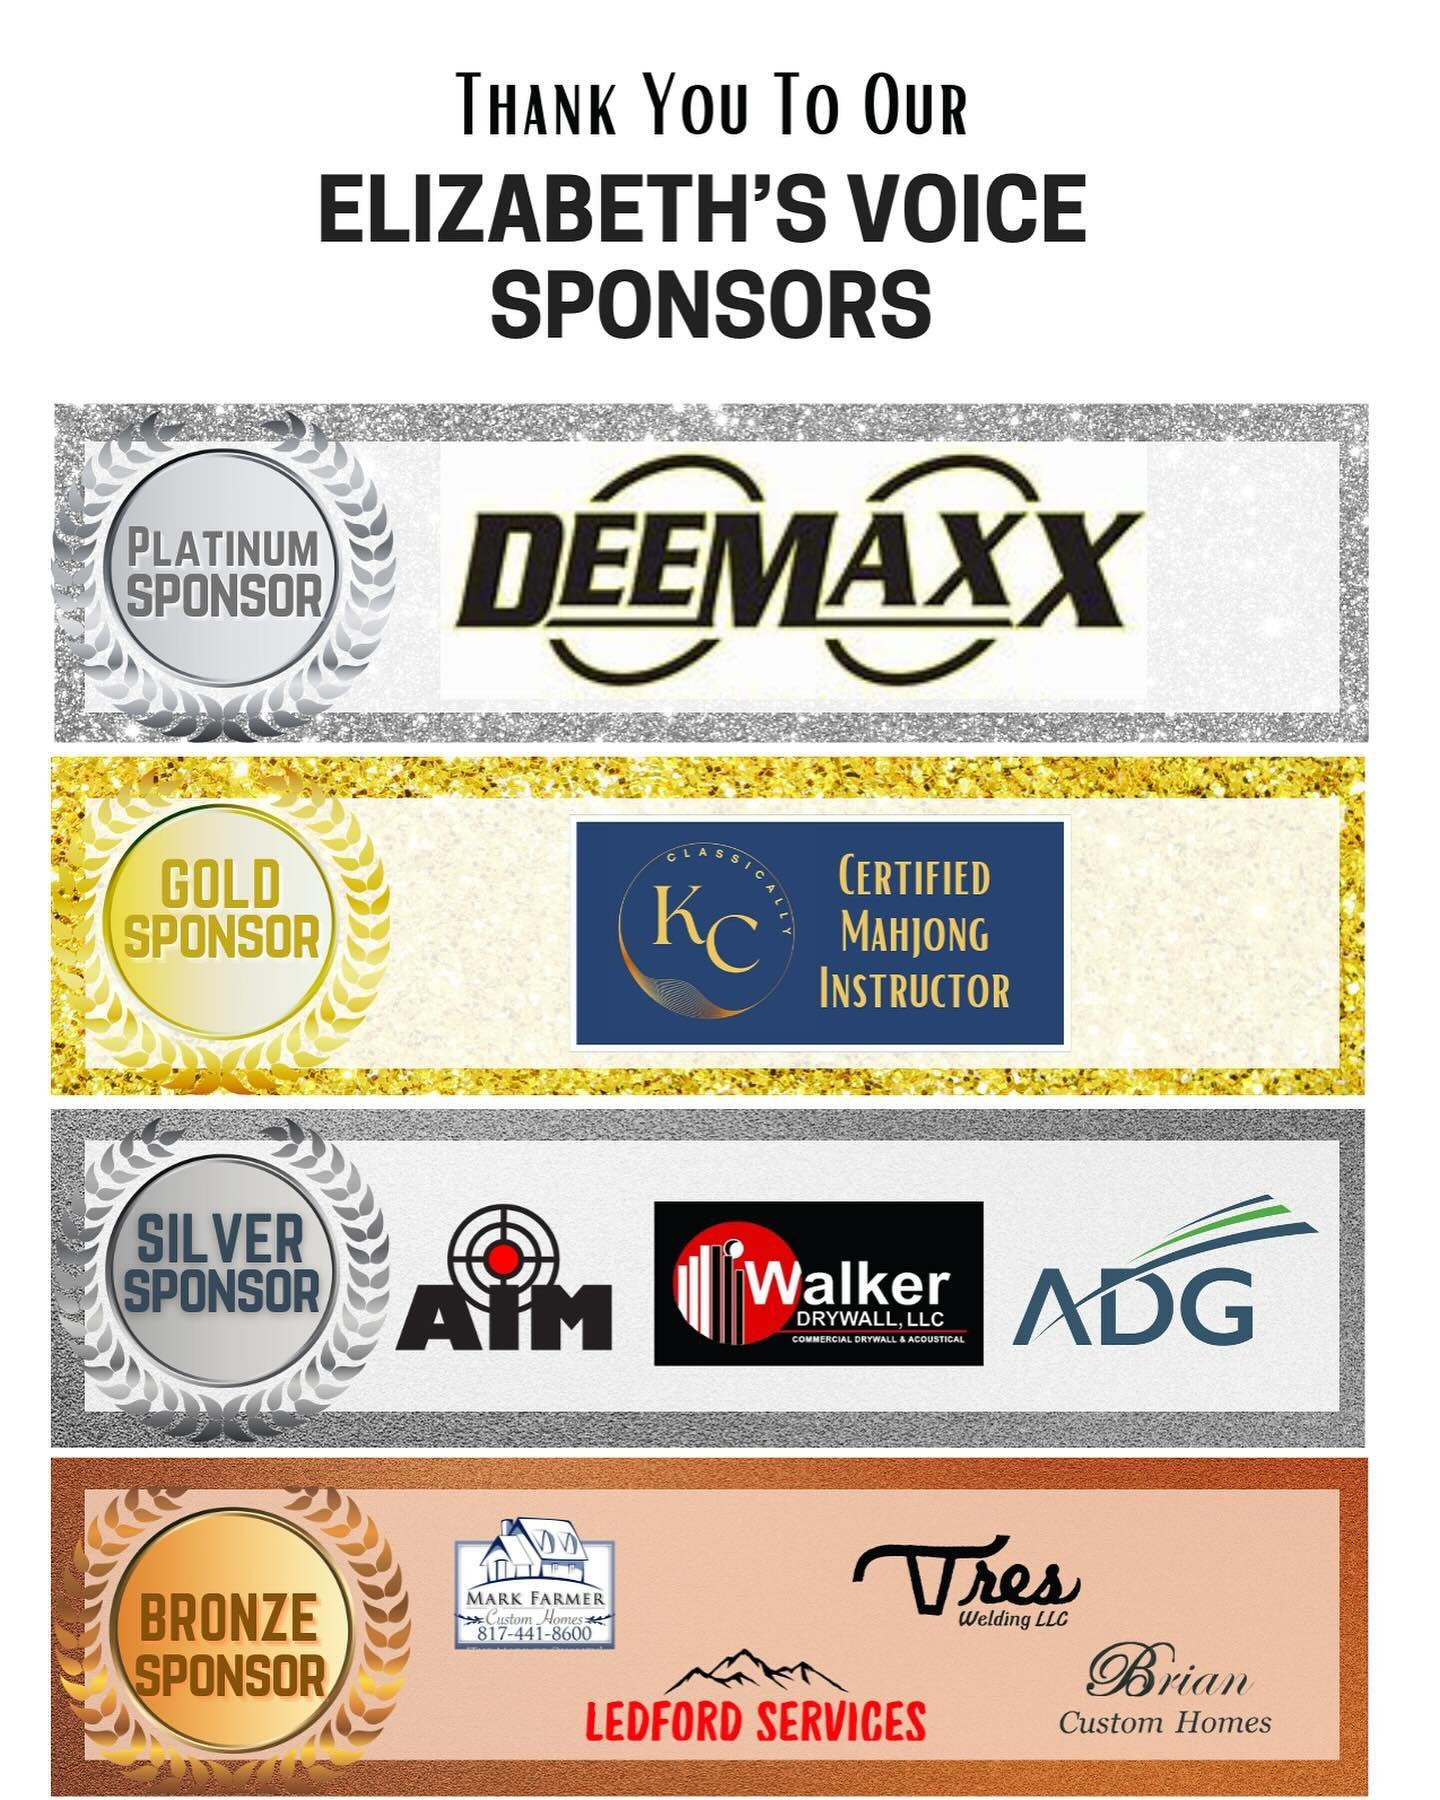 We are so thankful for our sponsors! The around of companies that rallied around us - we feel loved by this community!